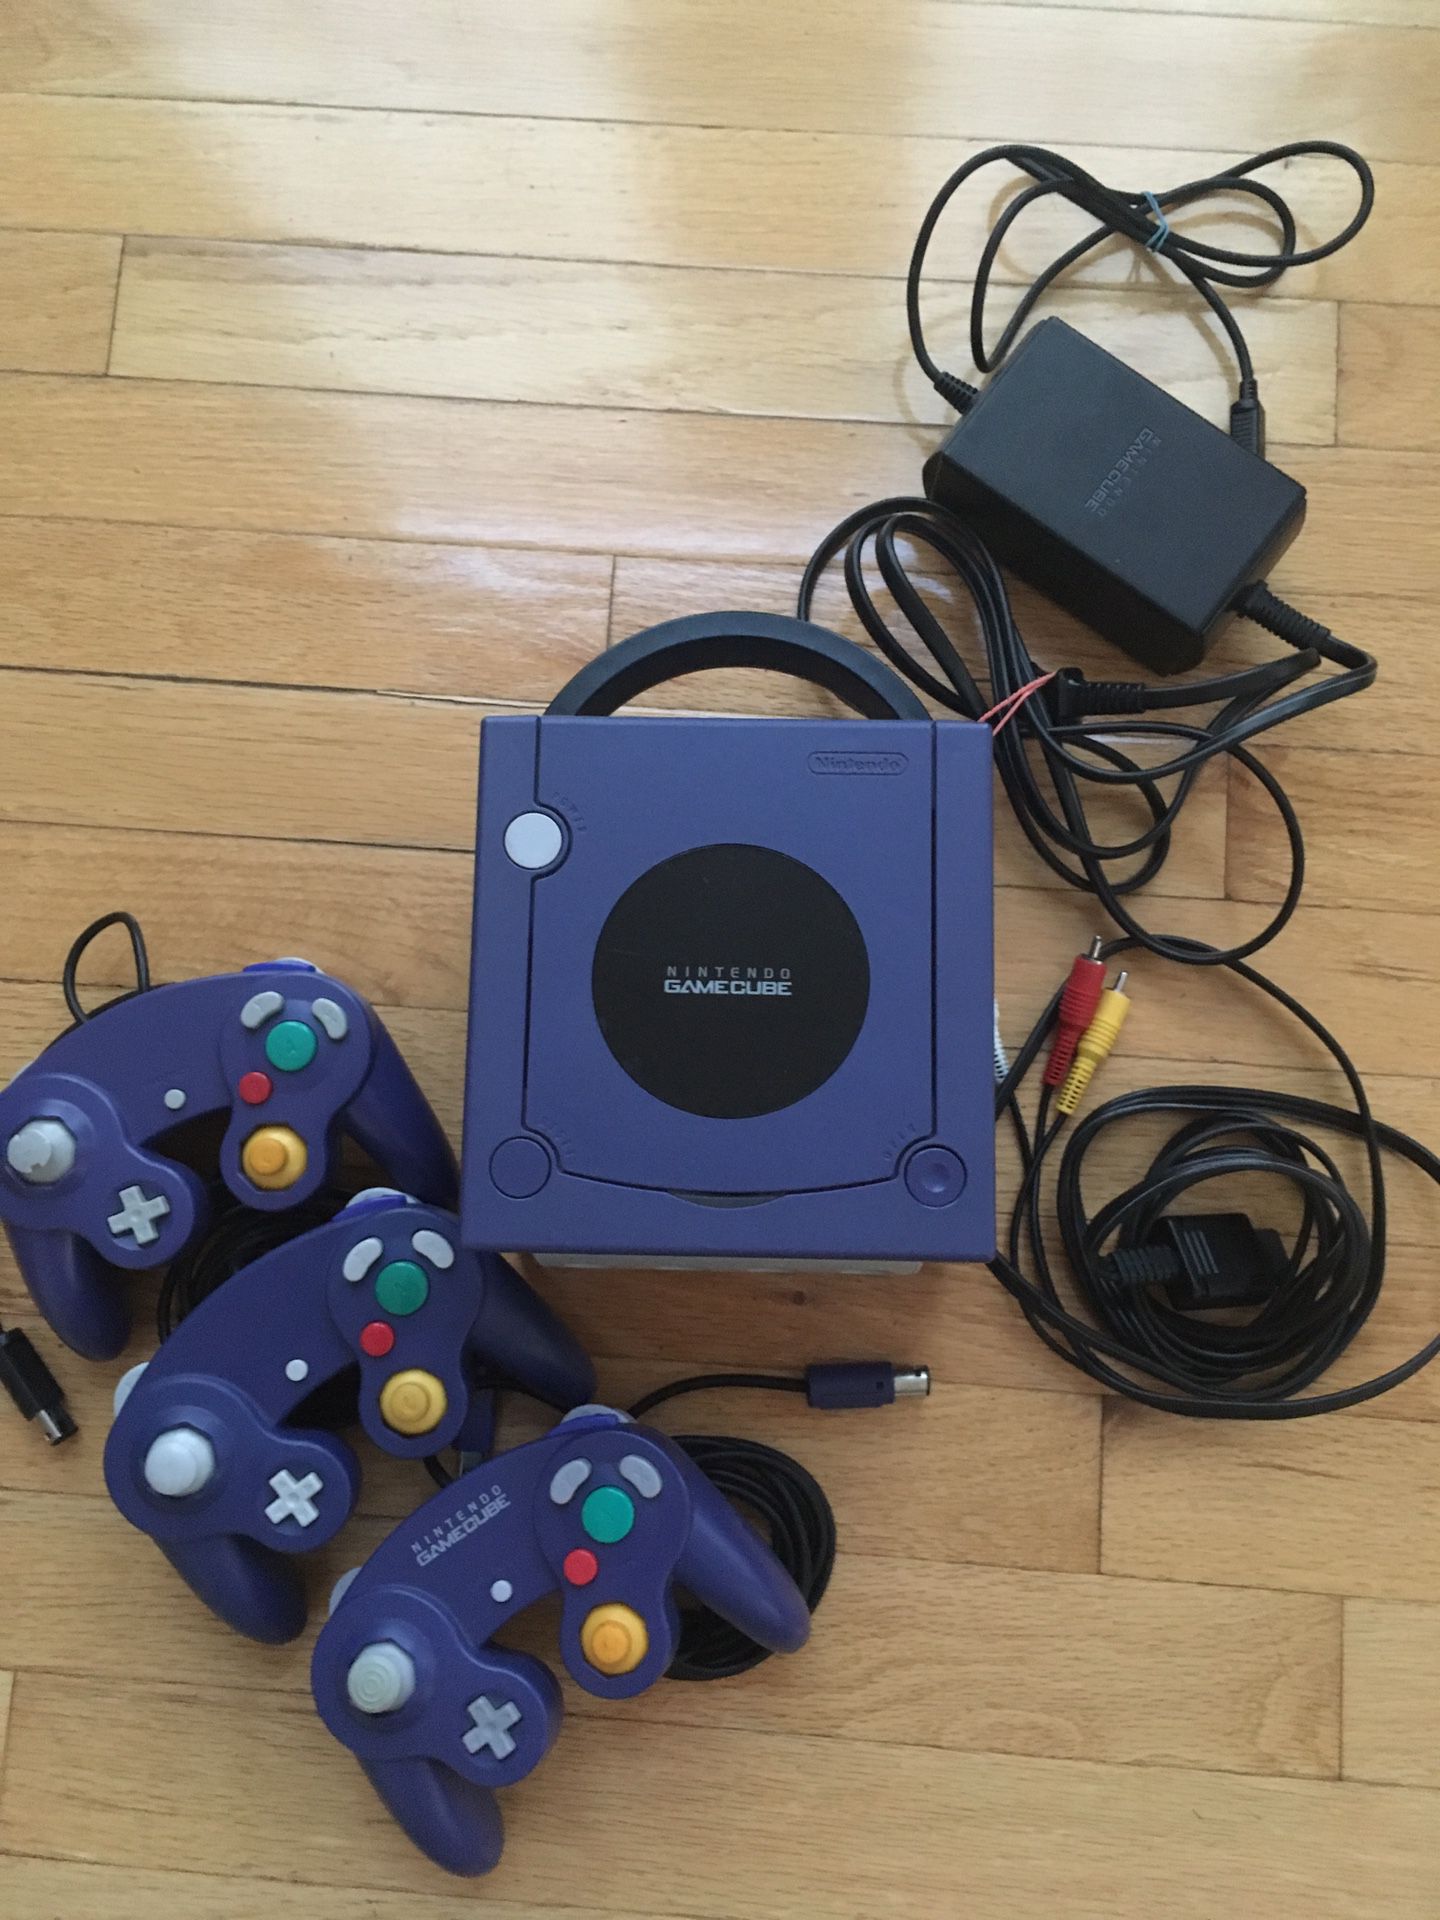 GameCube console, charger, audio visual cable, and 3 controllers